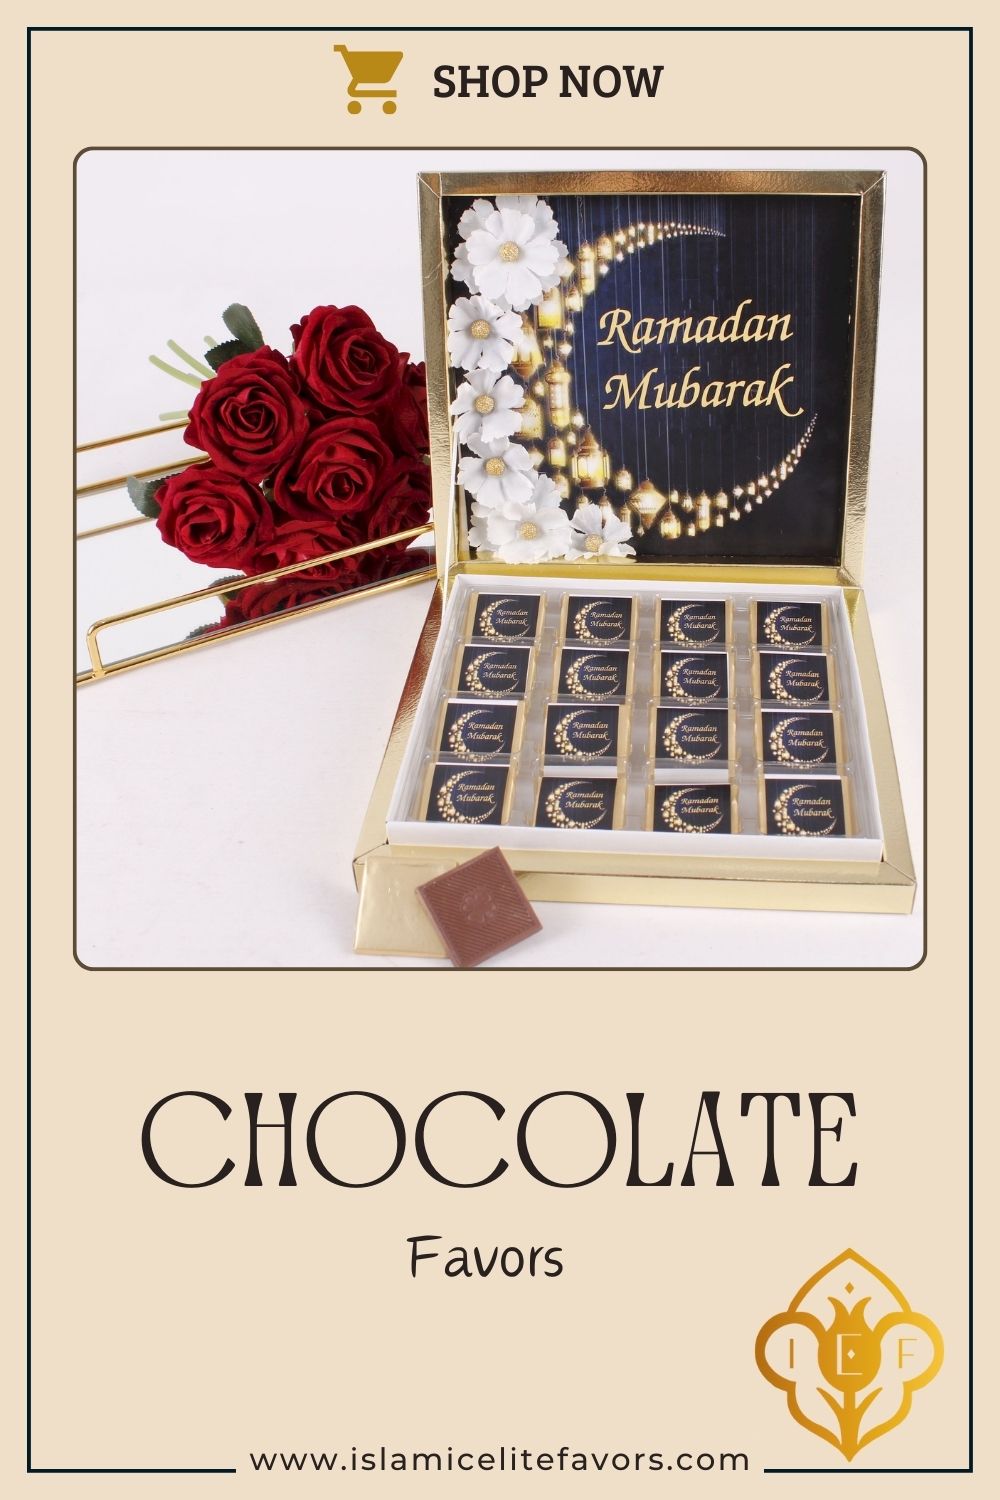 Chocolate Favors for Ramadan Eid, Happy Birthday, Baby Shower, Wedding - Islamic Elite Favors is a handmade gift shop offering a wide variety of unique and personalized gifts for all occasions. Whether you're looking for the perfect Ramadan, Eid, Hajj, wedding gift or something special for a birthday, baby shower or anniversary, we have something for everyone. High quality, made with love.